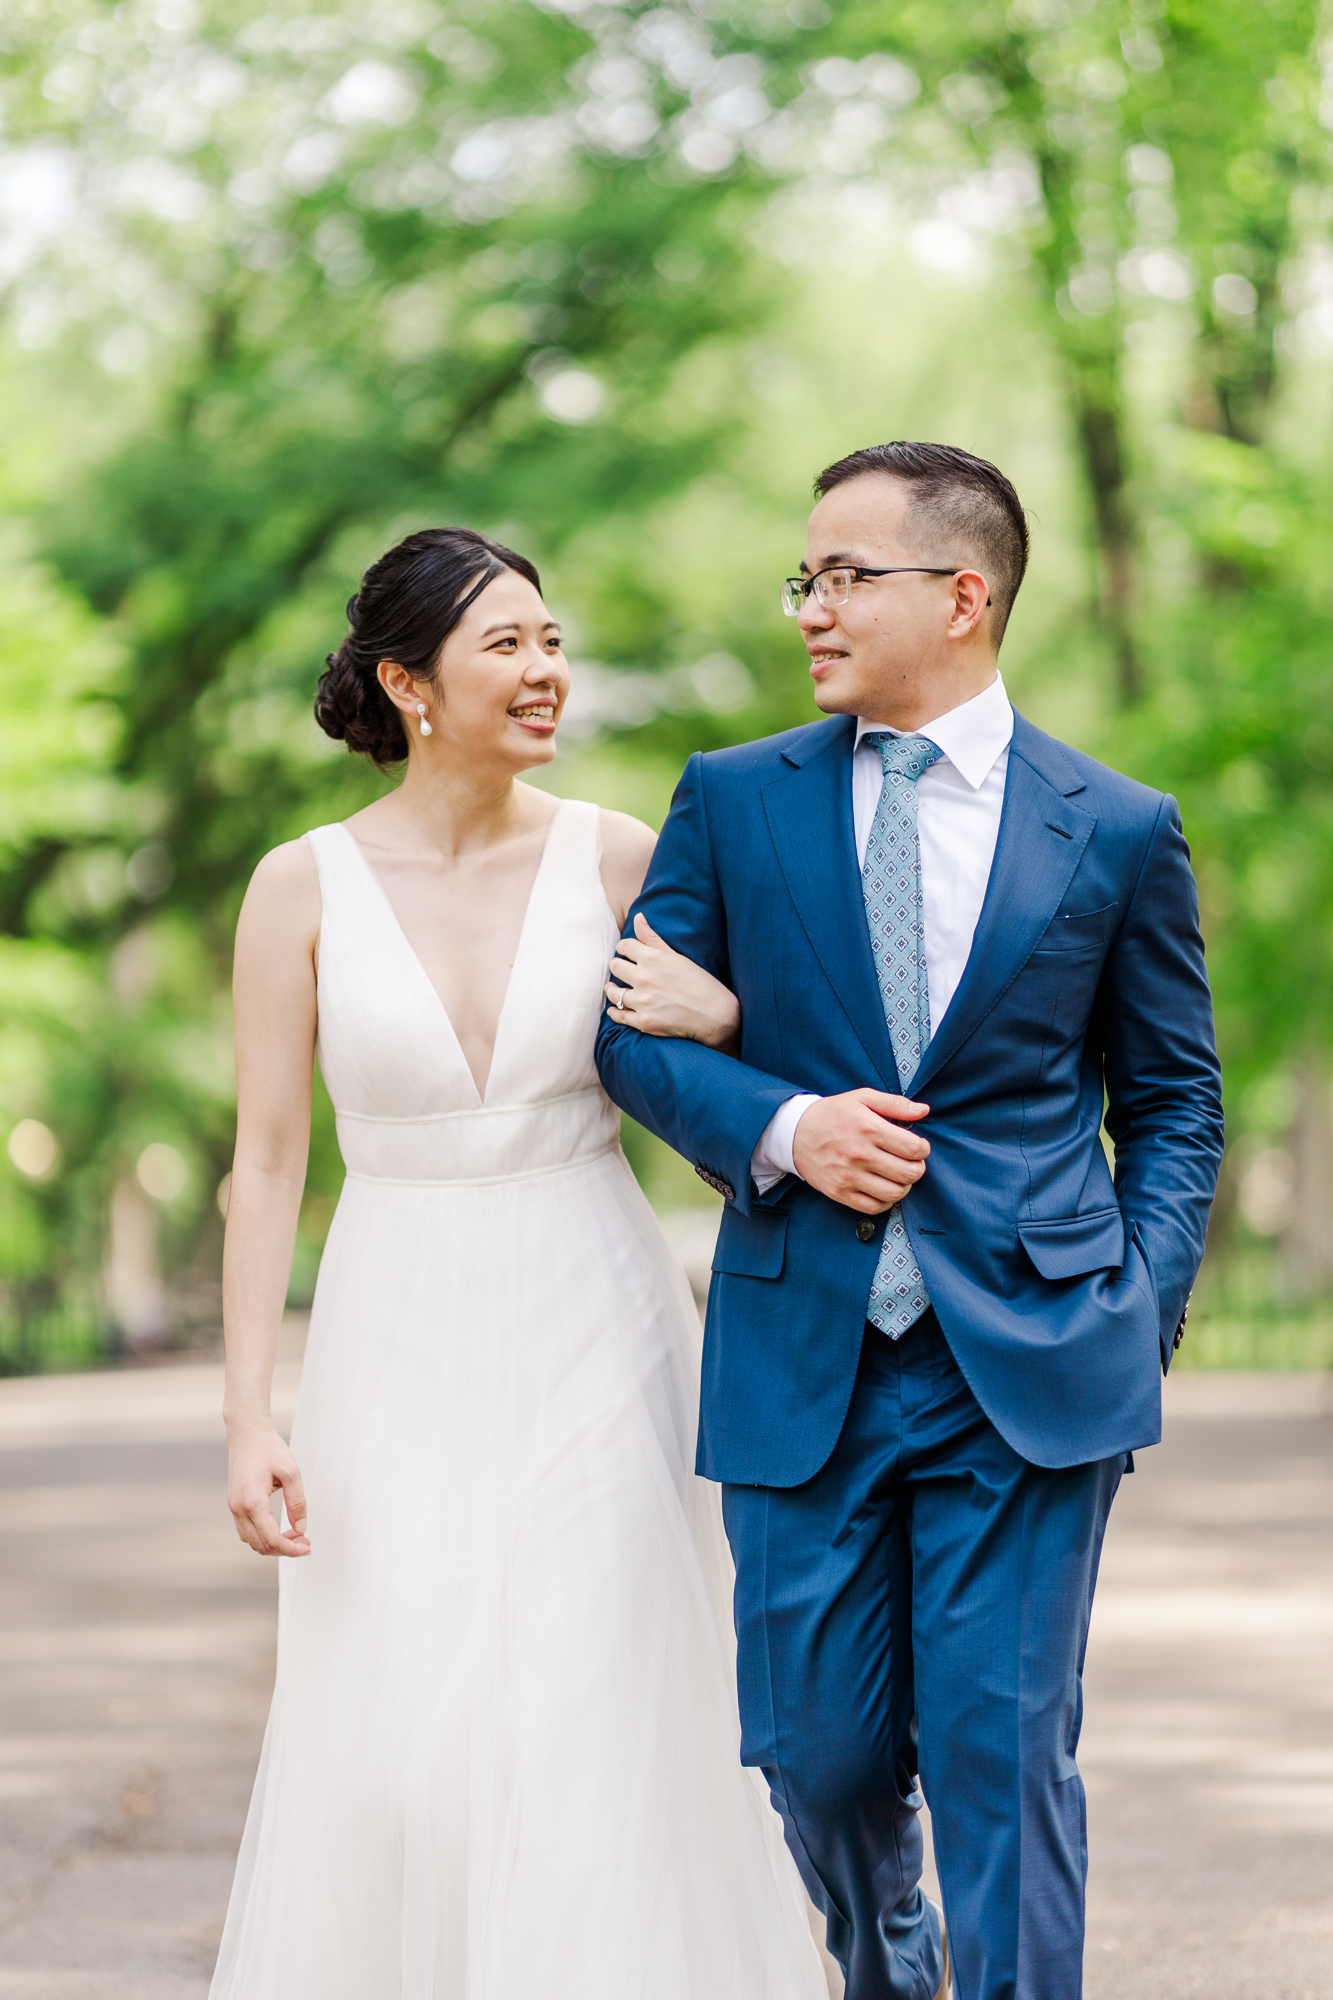 Vivid Photos of New York Elopement in DUMBO and Central Park